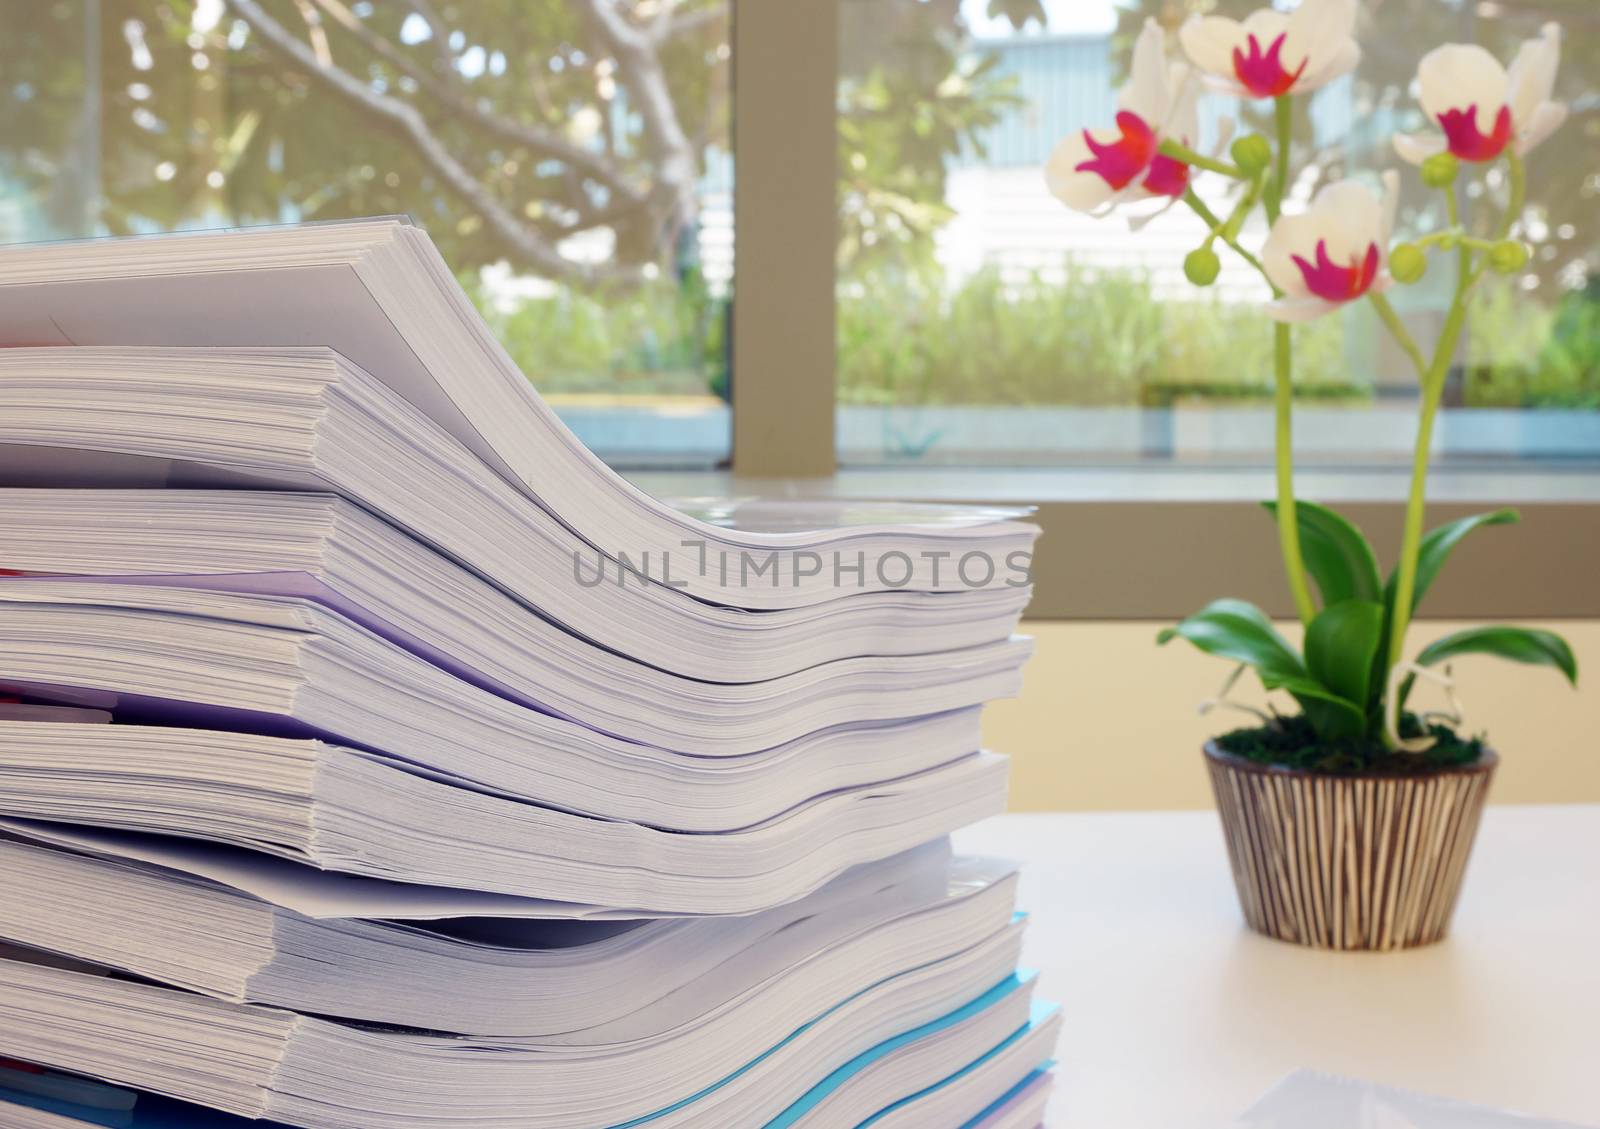 Accounting reports, made for presentations to executives, arranged for inspection.                               